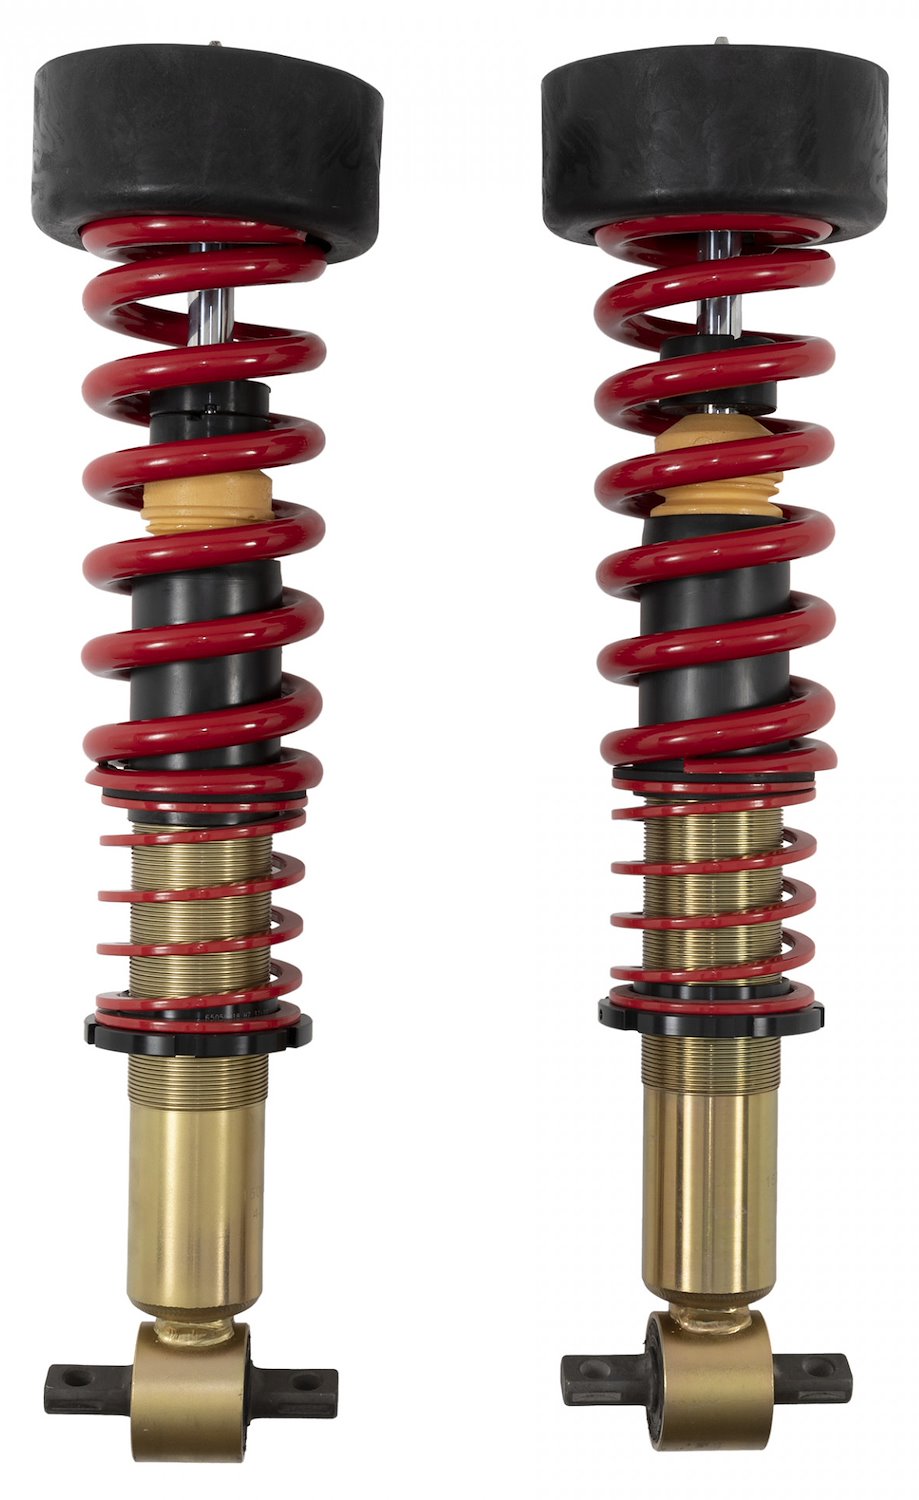 Street Performance Front Coilover Kit fits Select Late-Model Chevy Silverado, GMC Sierra 1500 2WD/4WD Pickup Truck